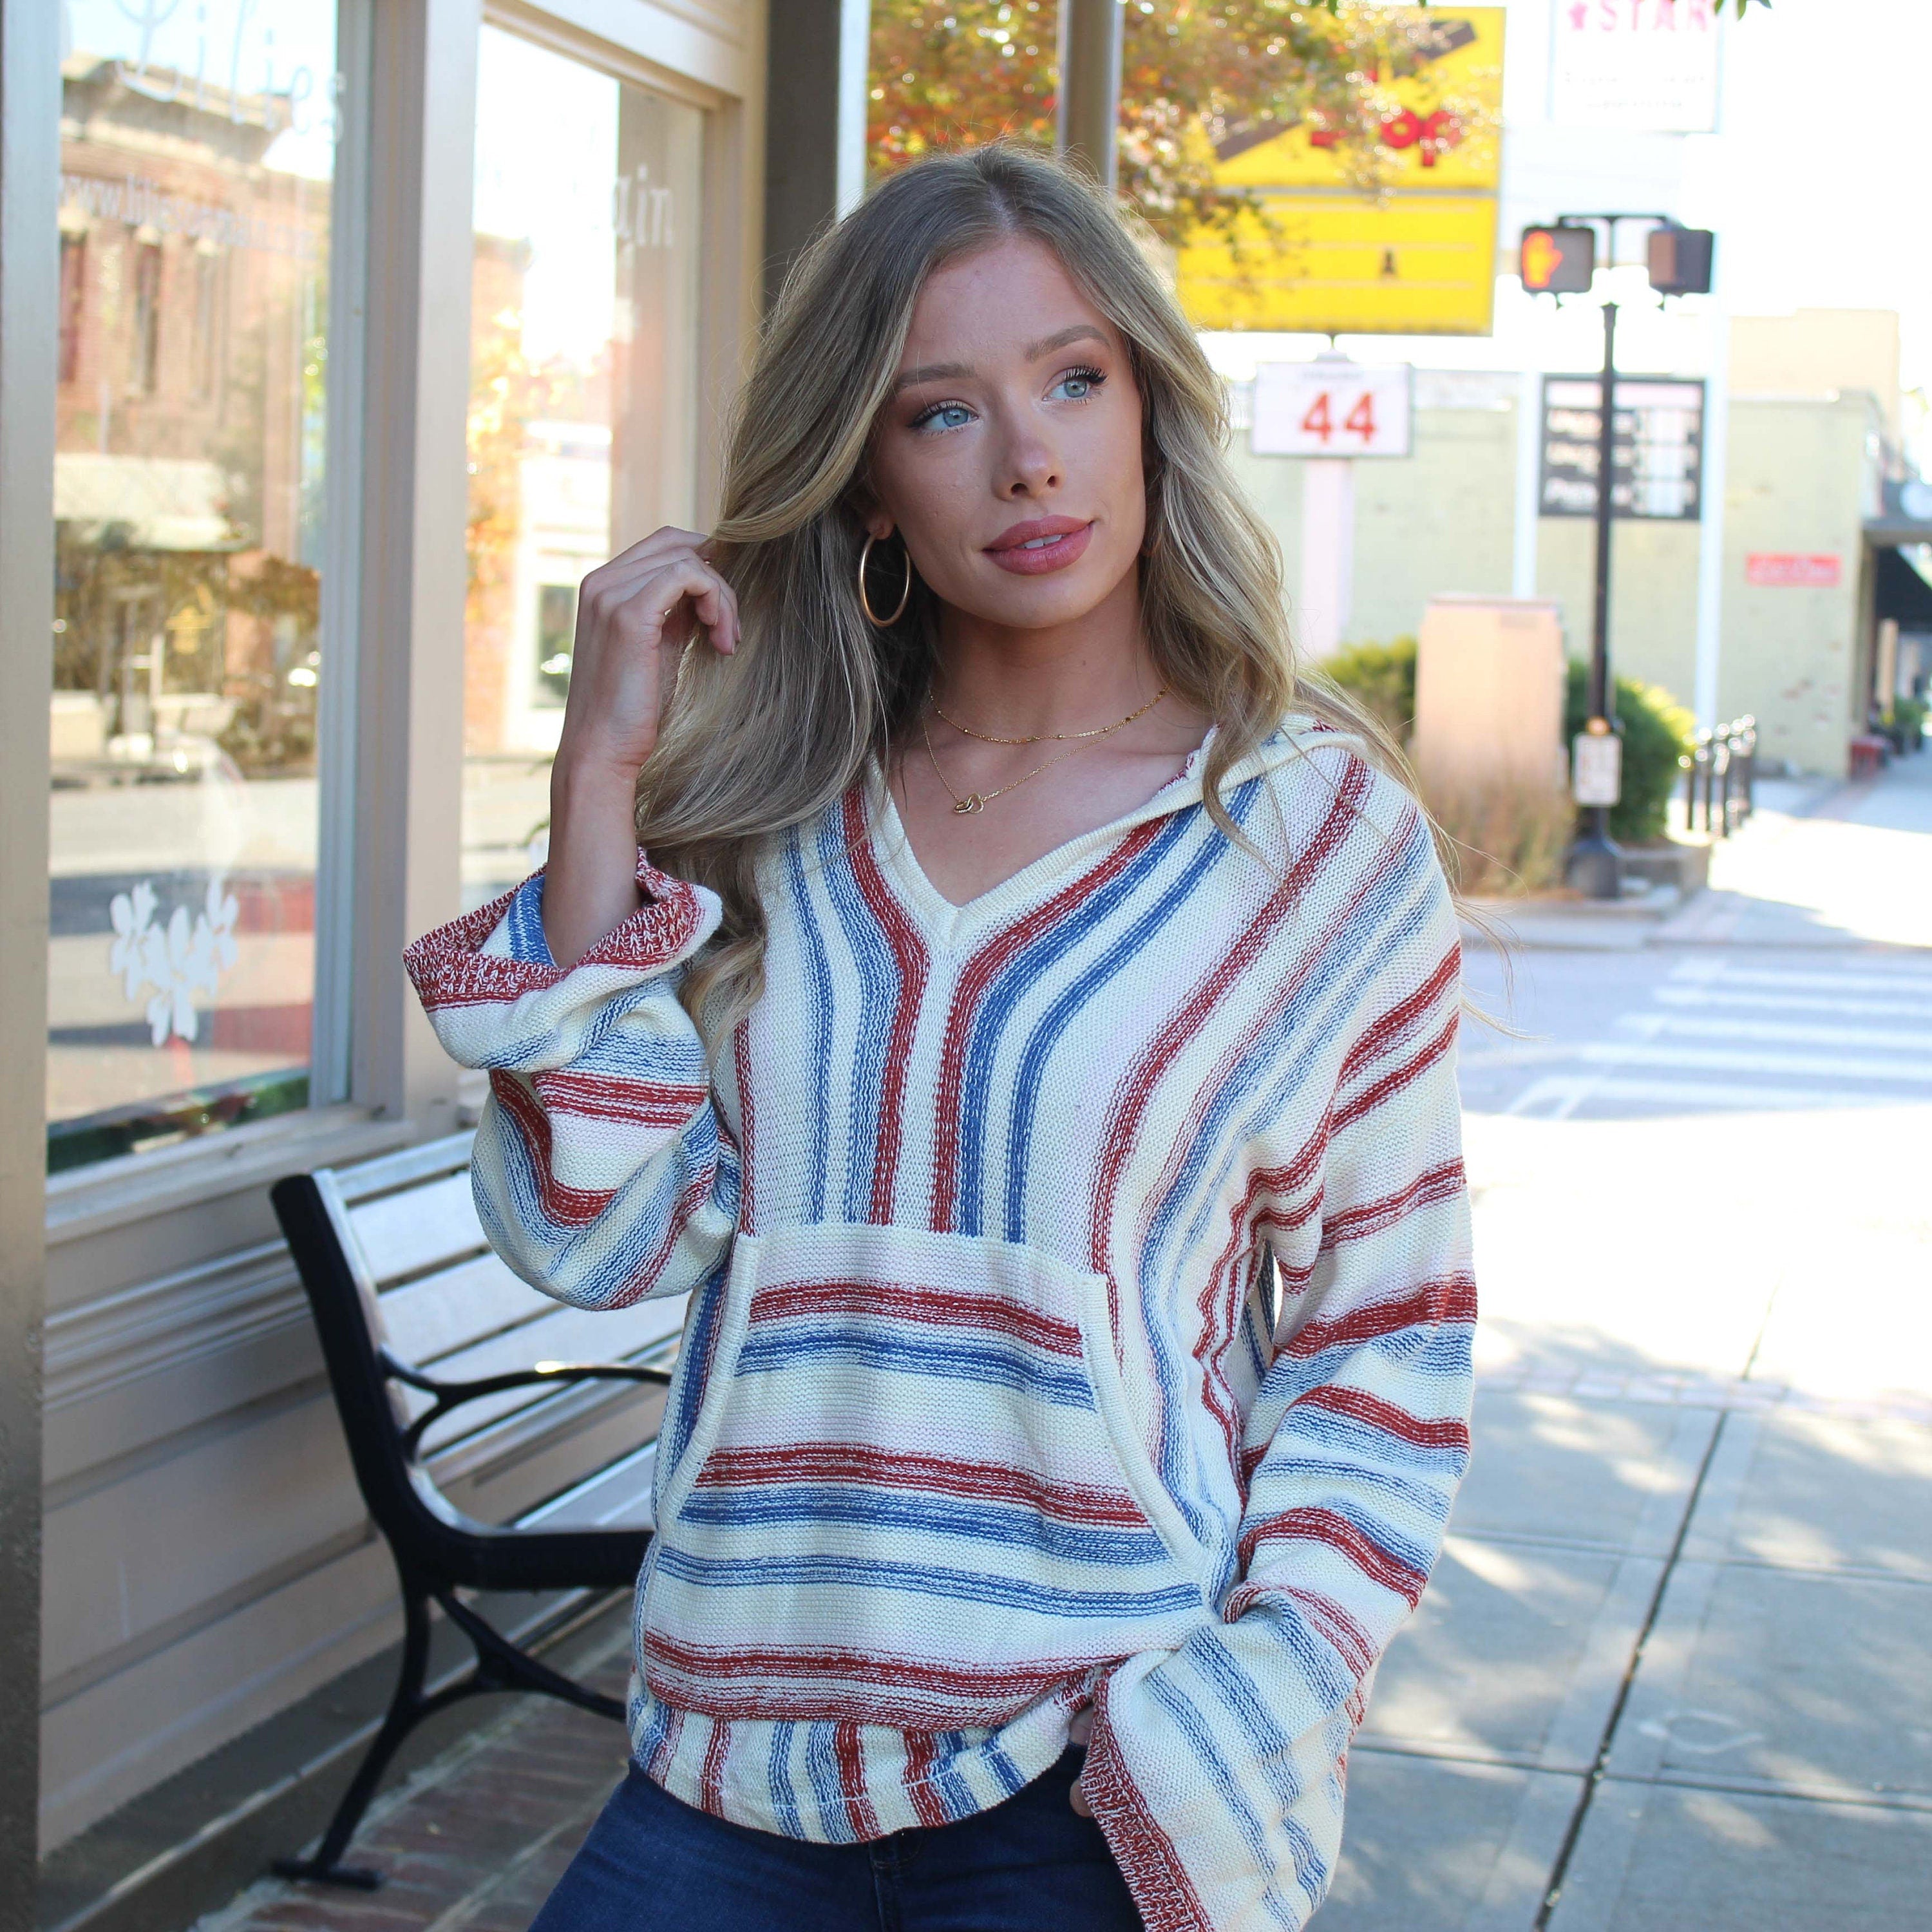 Hooded Striped Sweater with Kangaroo Pockets - Cozy Warm  sweater - Hooded Knit Sweater - Bohemian Sweater